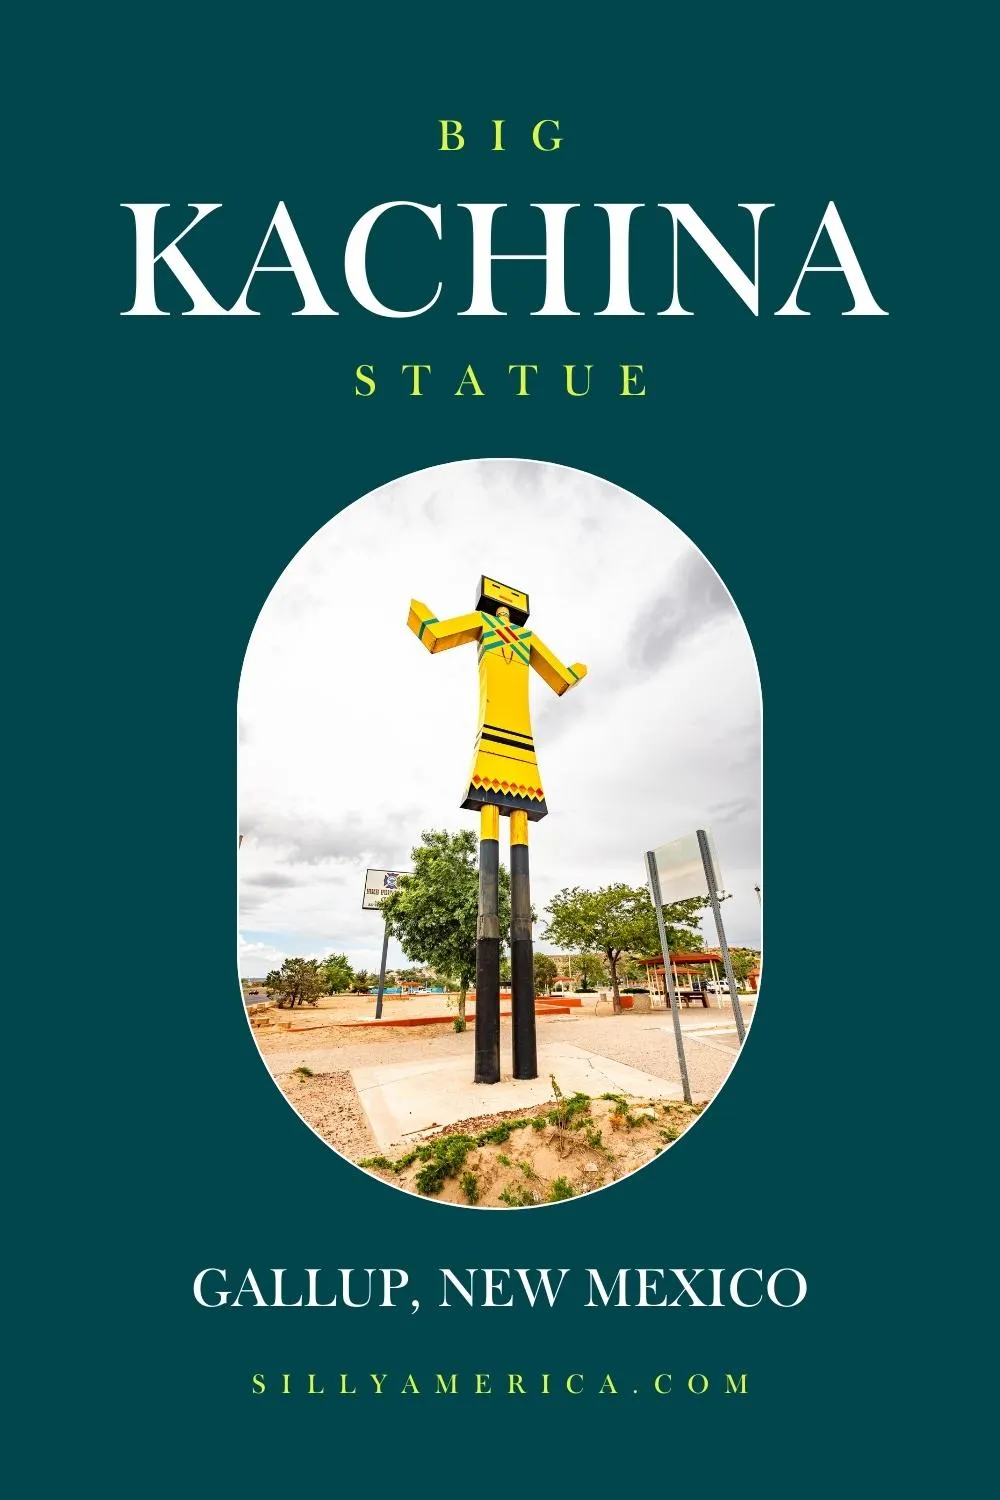 Greetings from Gallup, New Mexico, where you'll find this Big Kachina Statue welcoming you to town. Since the 1950s there's been at least one Big Kachina Statue in Gallup, New Mexico. Visit this roadside attraction on a Route 66 road trip through New Mexico. Add it to your travel itinerary! #Route66 #Route66Attraction #NewMexico #NewMexicoRoadTrip #RoadTrip #Route66Roadtrip #RoadsideAttraction #RoadsideAttractions